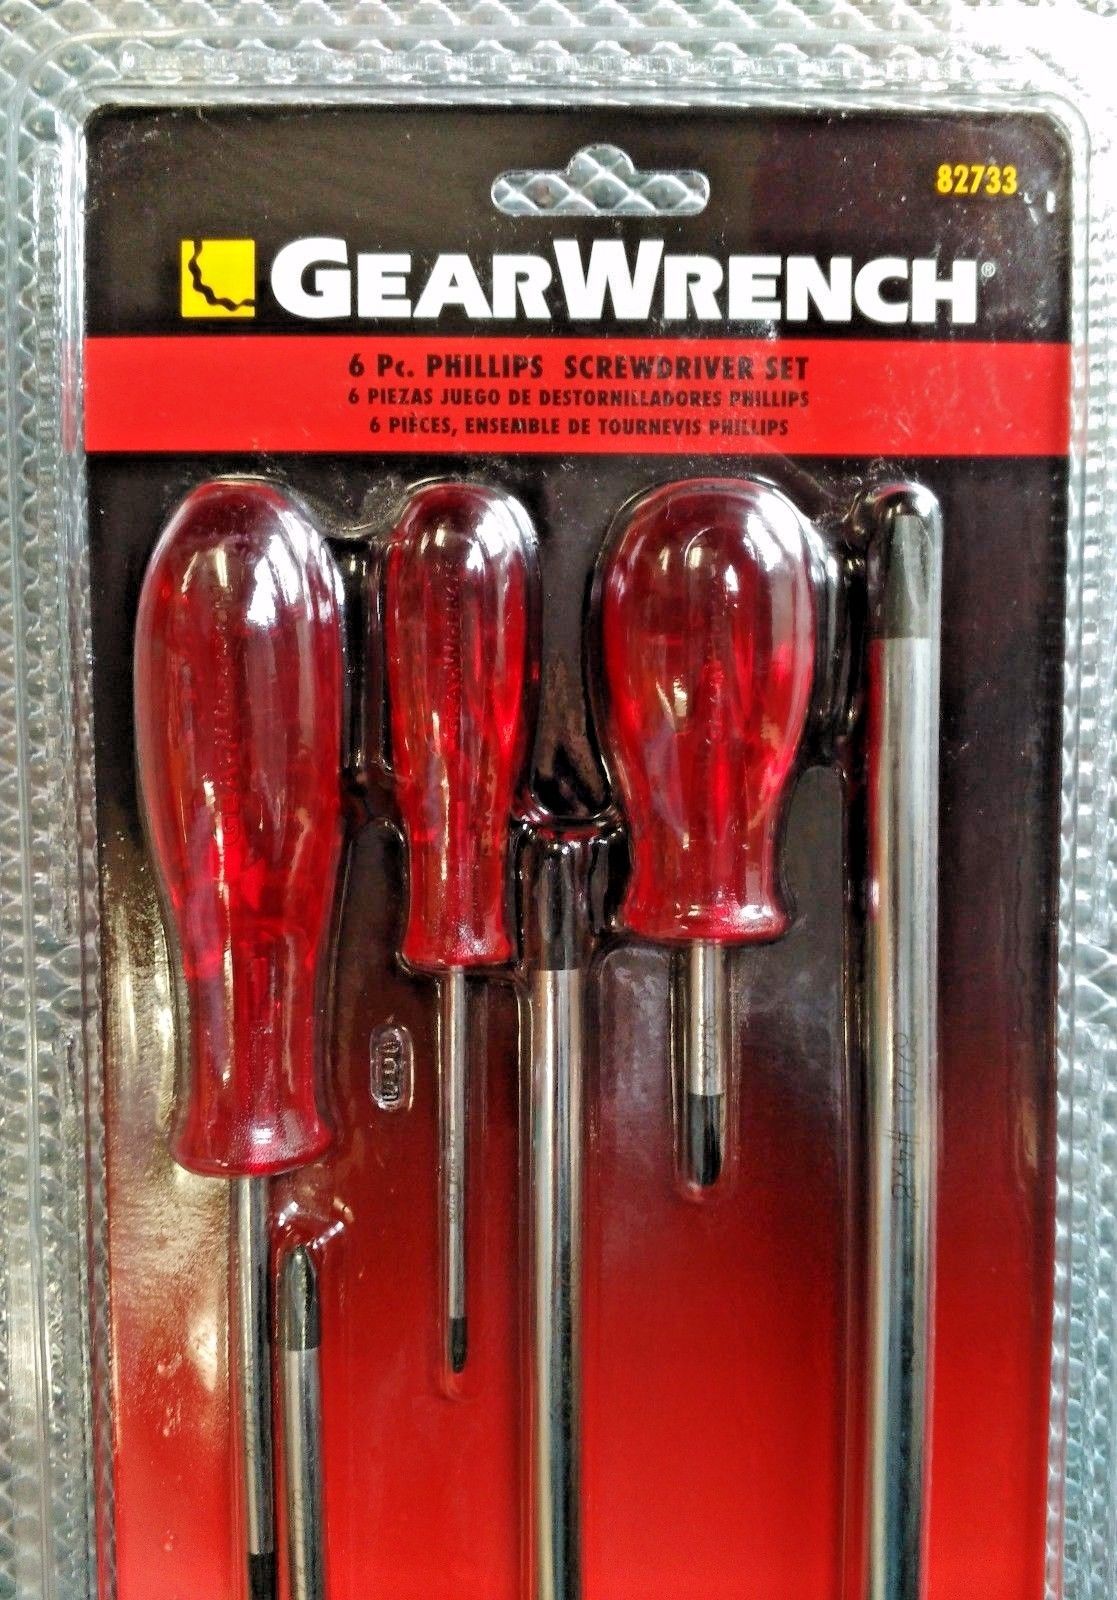 Gearwrench 82733 6 Piece Phillips Screwdriver Set